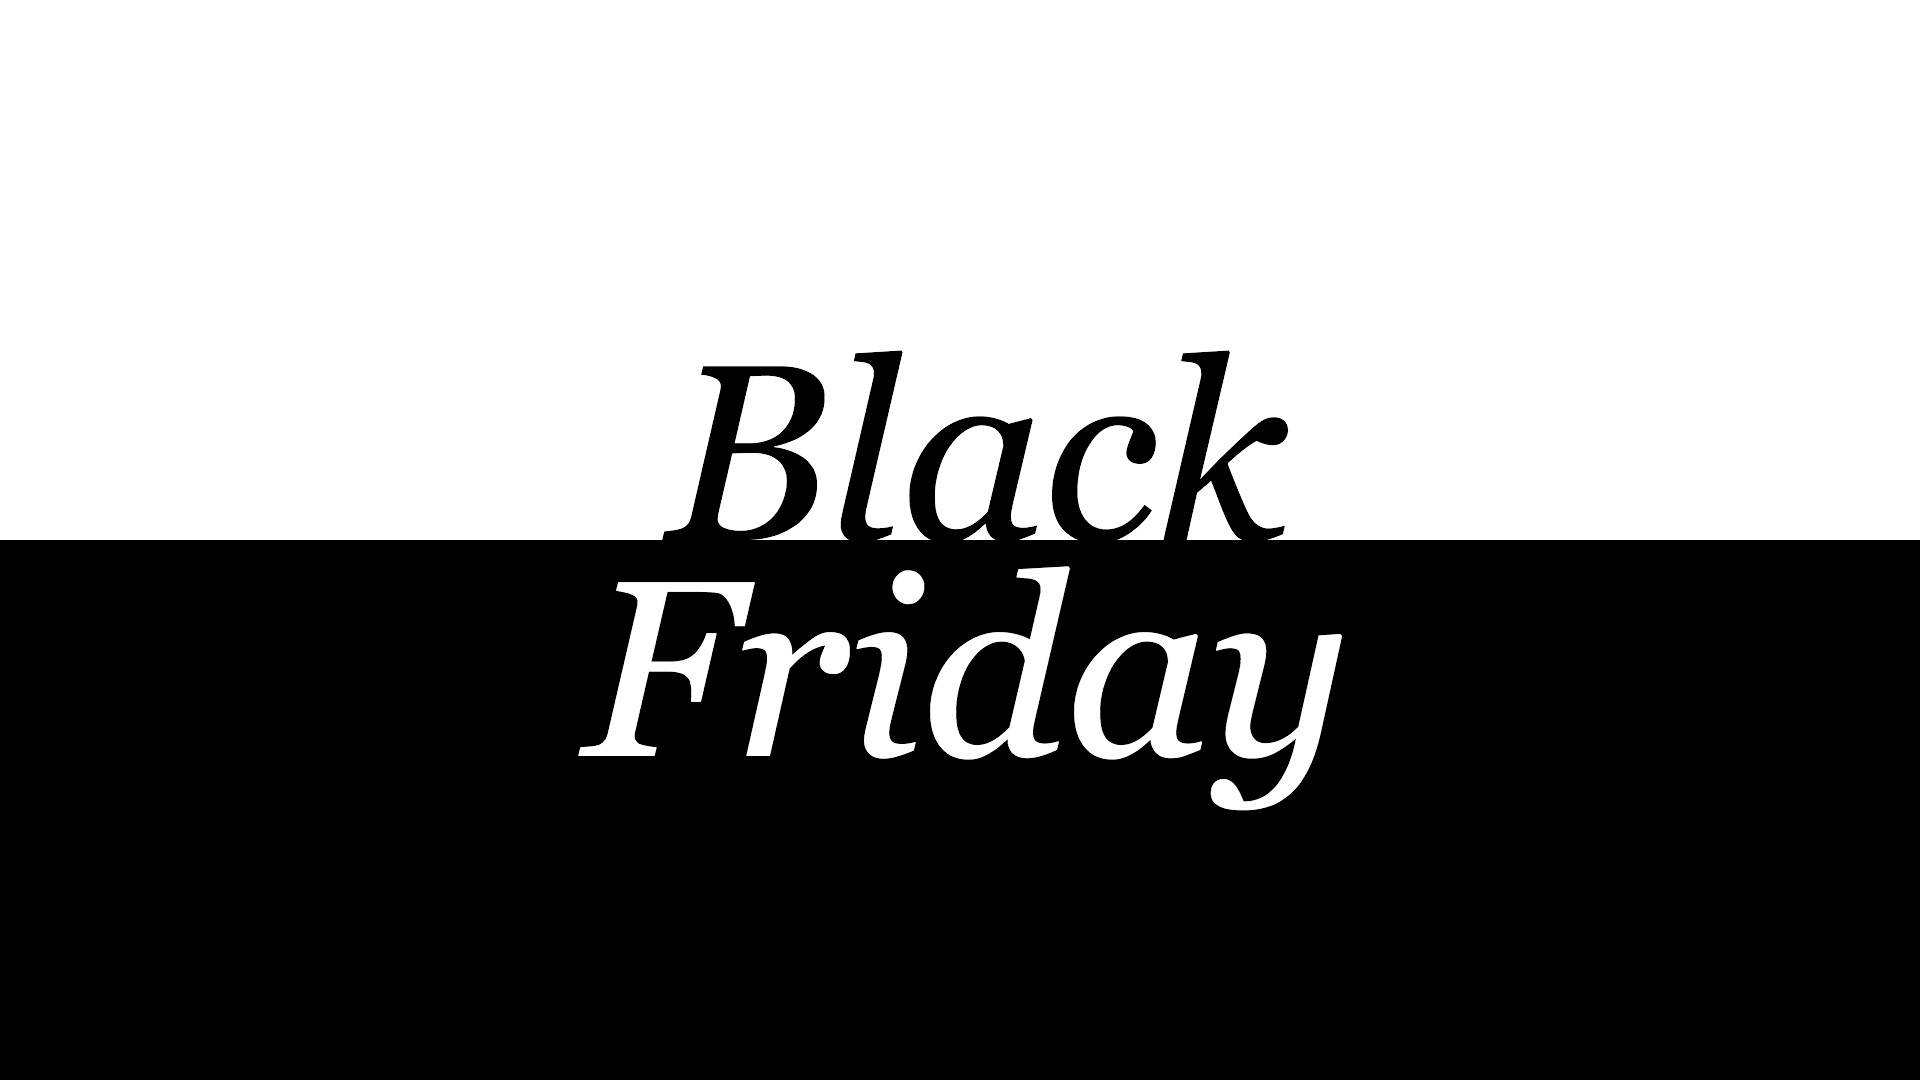 Black Friday Impactful Shopping Discounts in Black and White Wallpaper